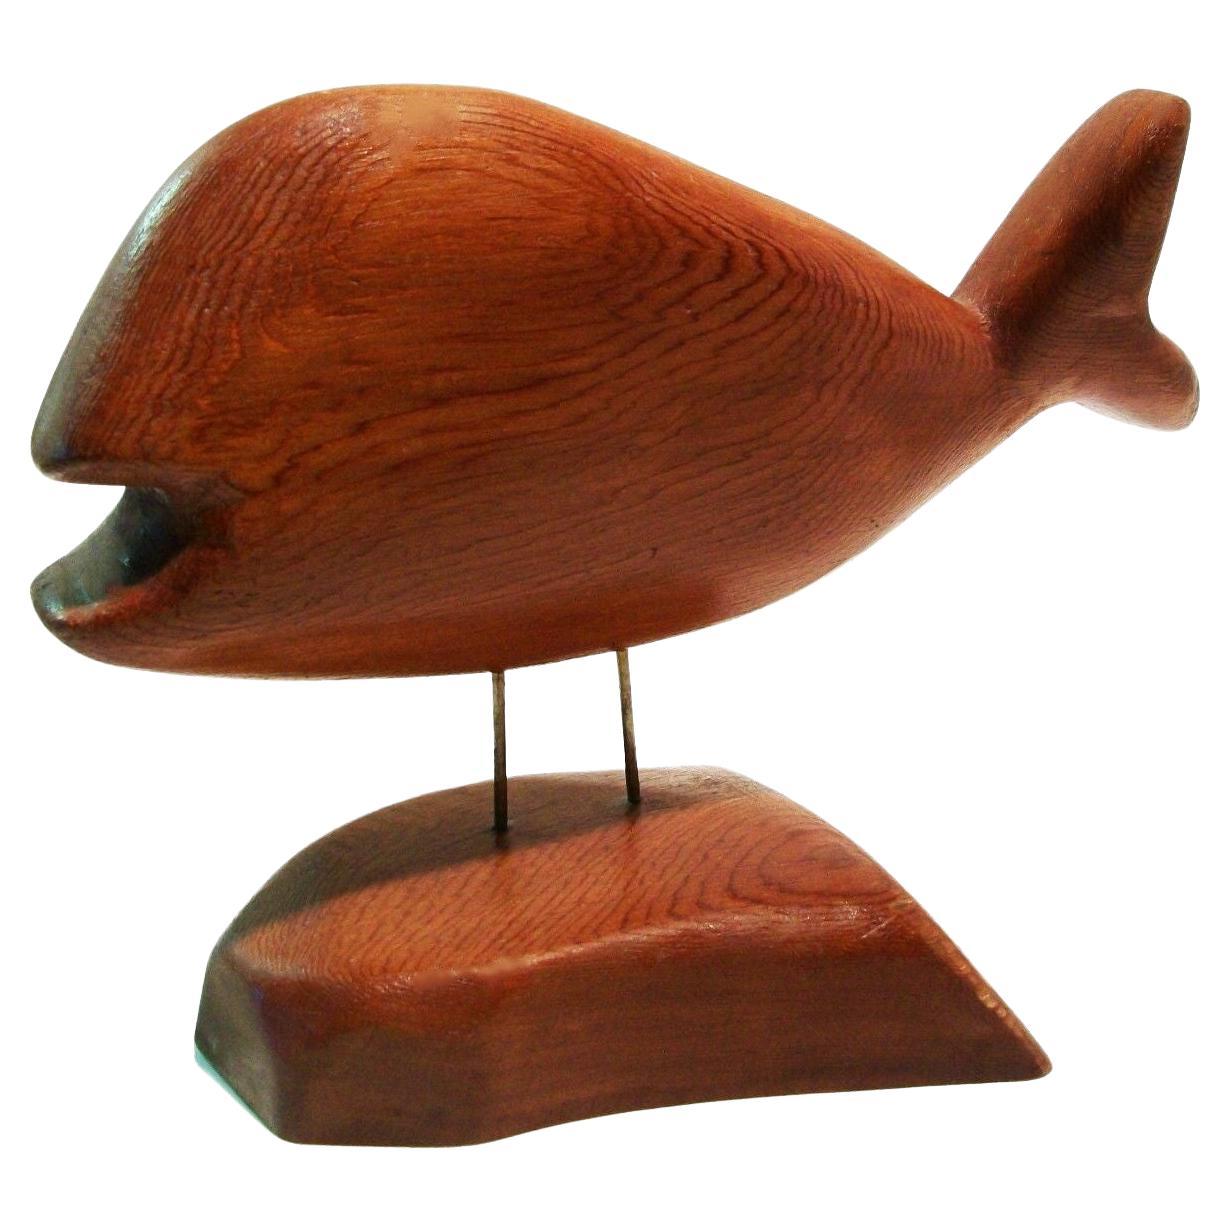 MIKE MATAS - Vintage Folk Art Whale Carving on Stand - Signed - Canada - C. 1980